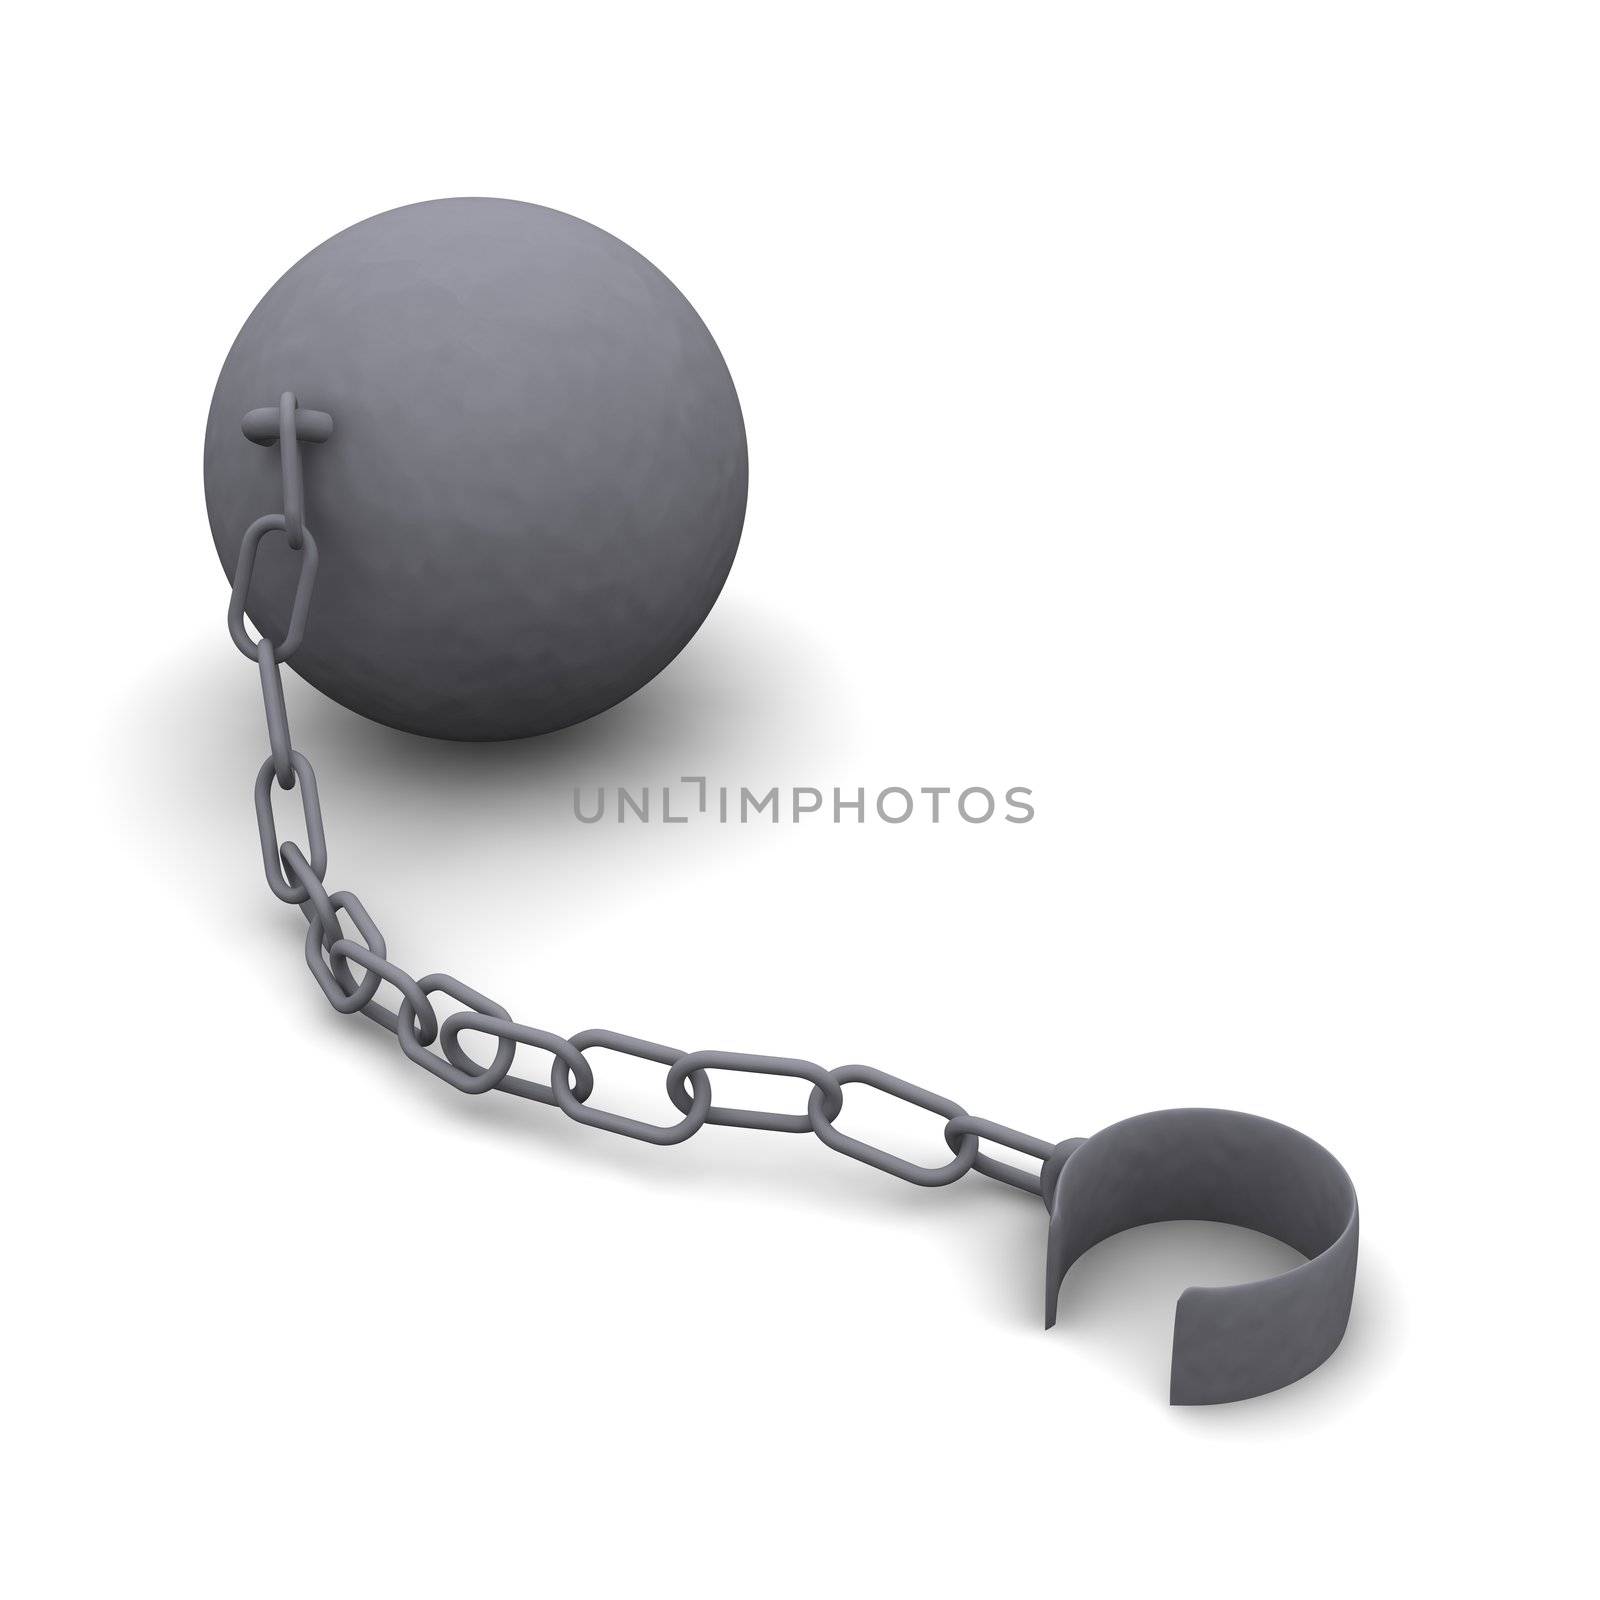 Iron ball and released shackle. 3d rendered illustration.